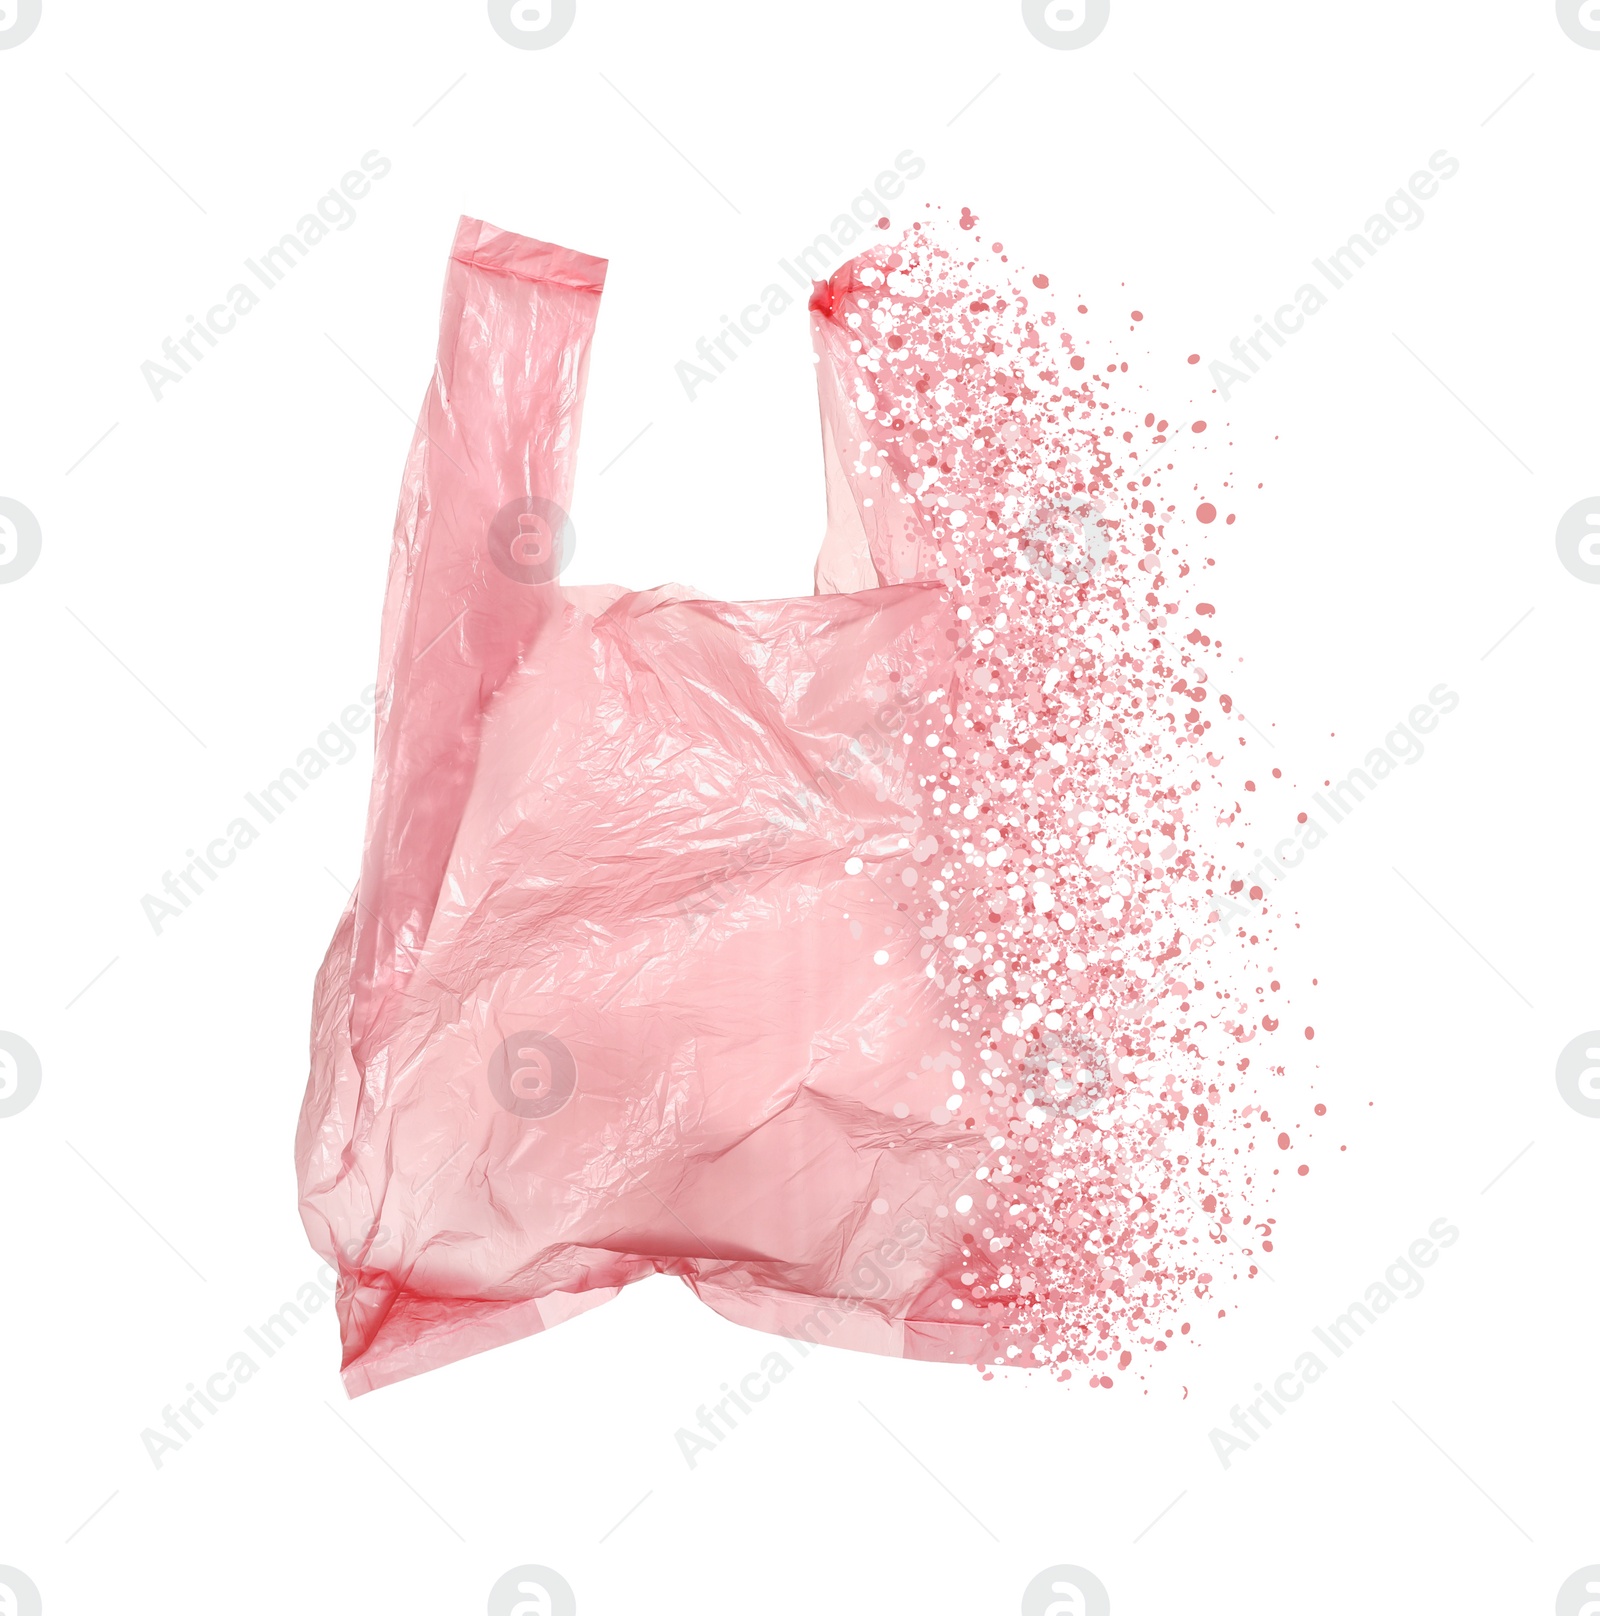 Image of Pink disposable bag vanishing on white background. Plastic decomposition